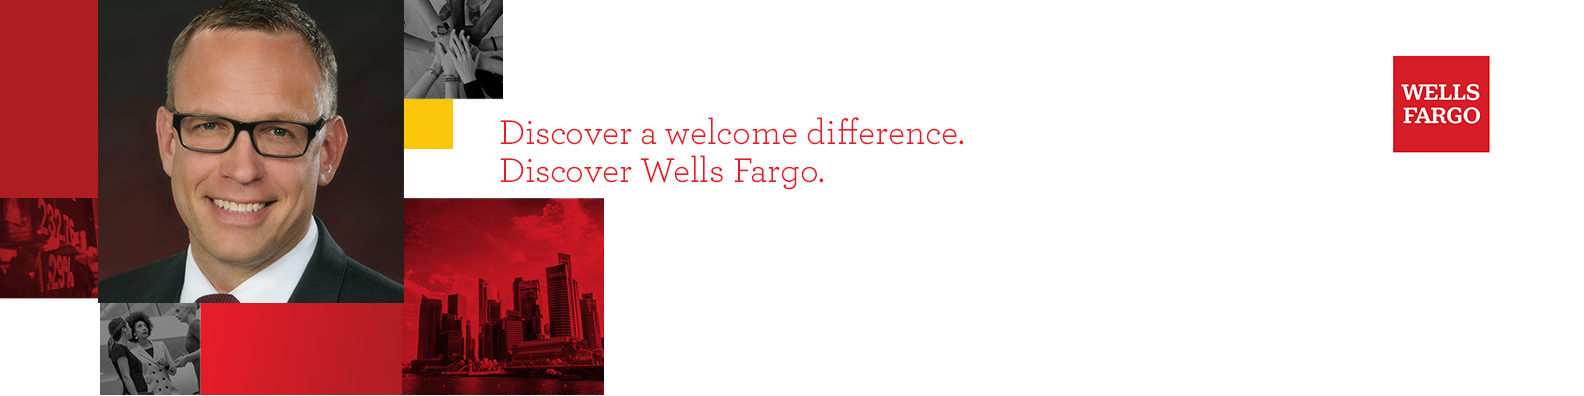 Discover a welcome difference. Discover Wells Fargo.